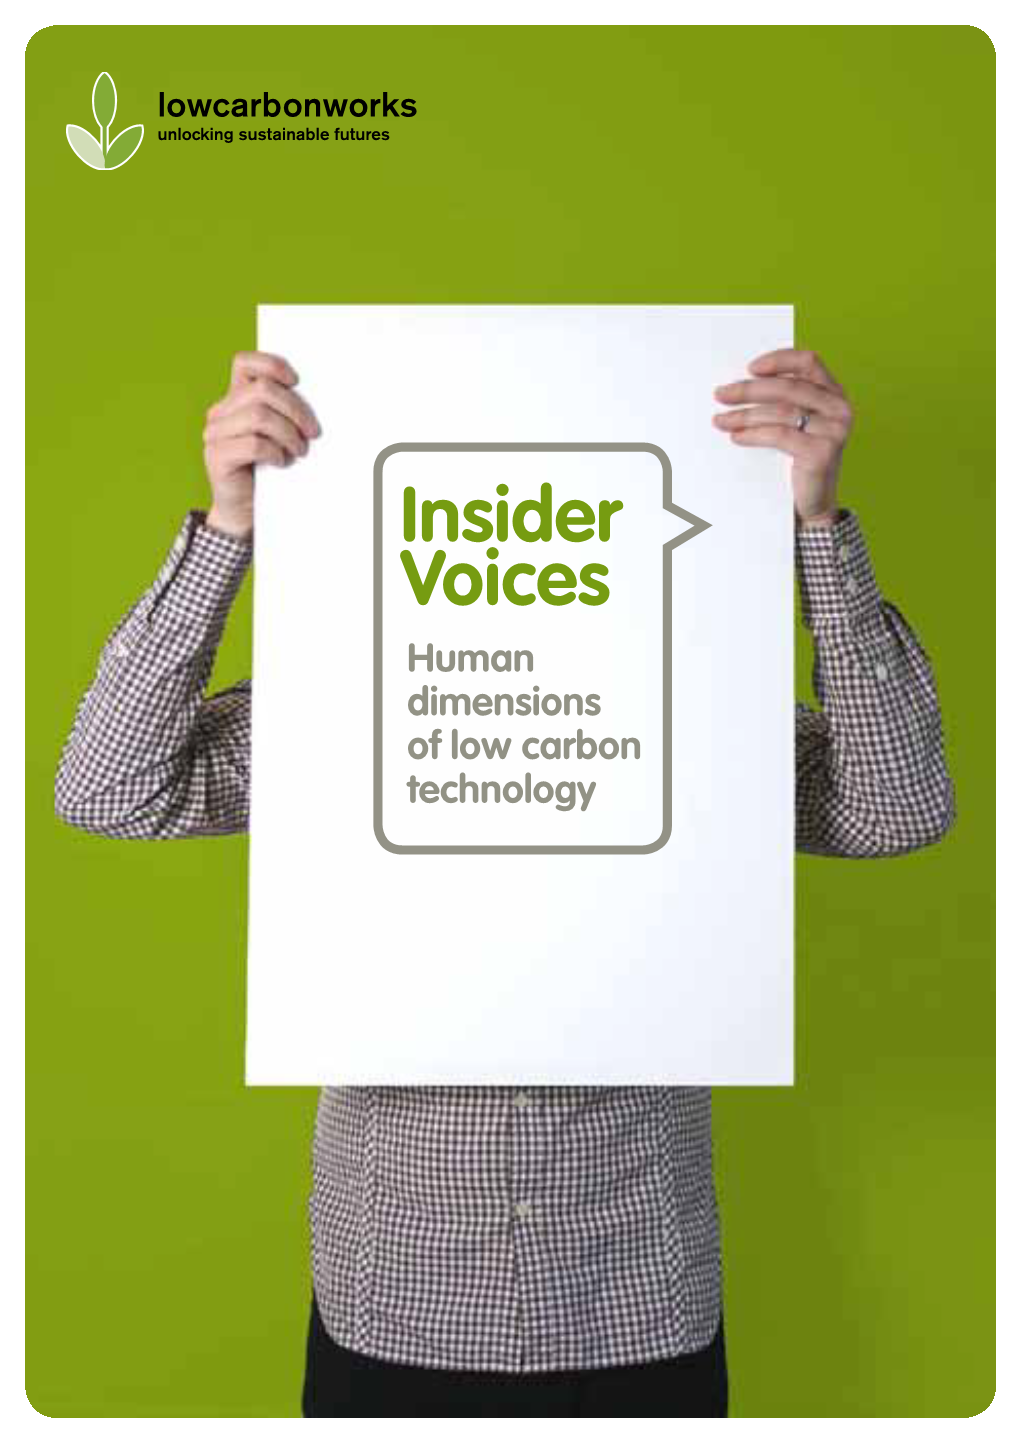 Insider Voices Human Dimensions of Low Carbon Technology Lowcarbonworks Centre for Action Research in Professional Practice, University of Bath